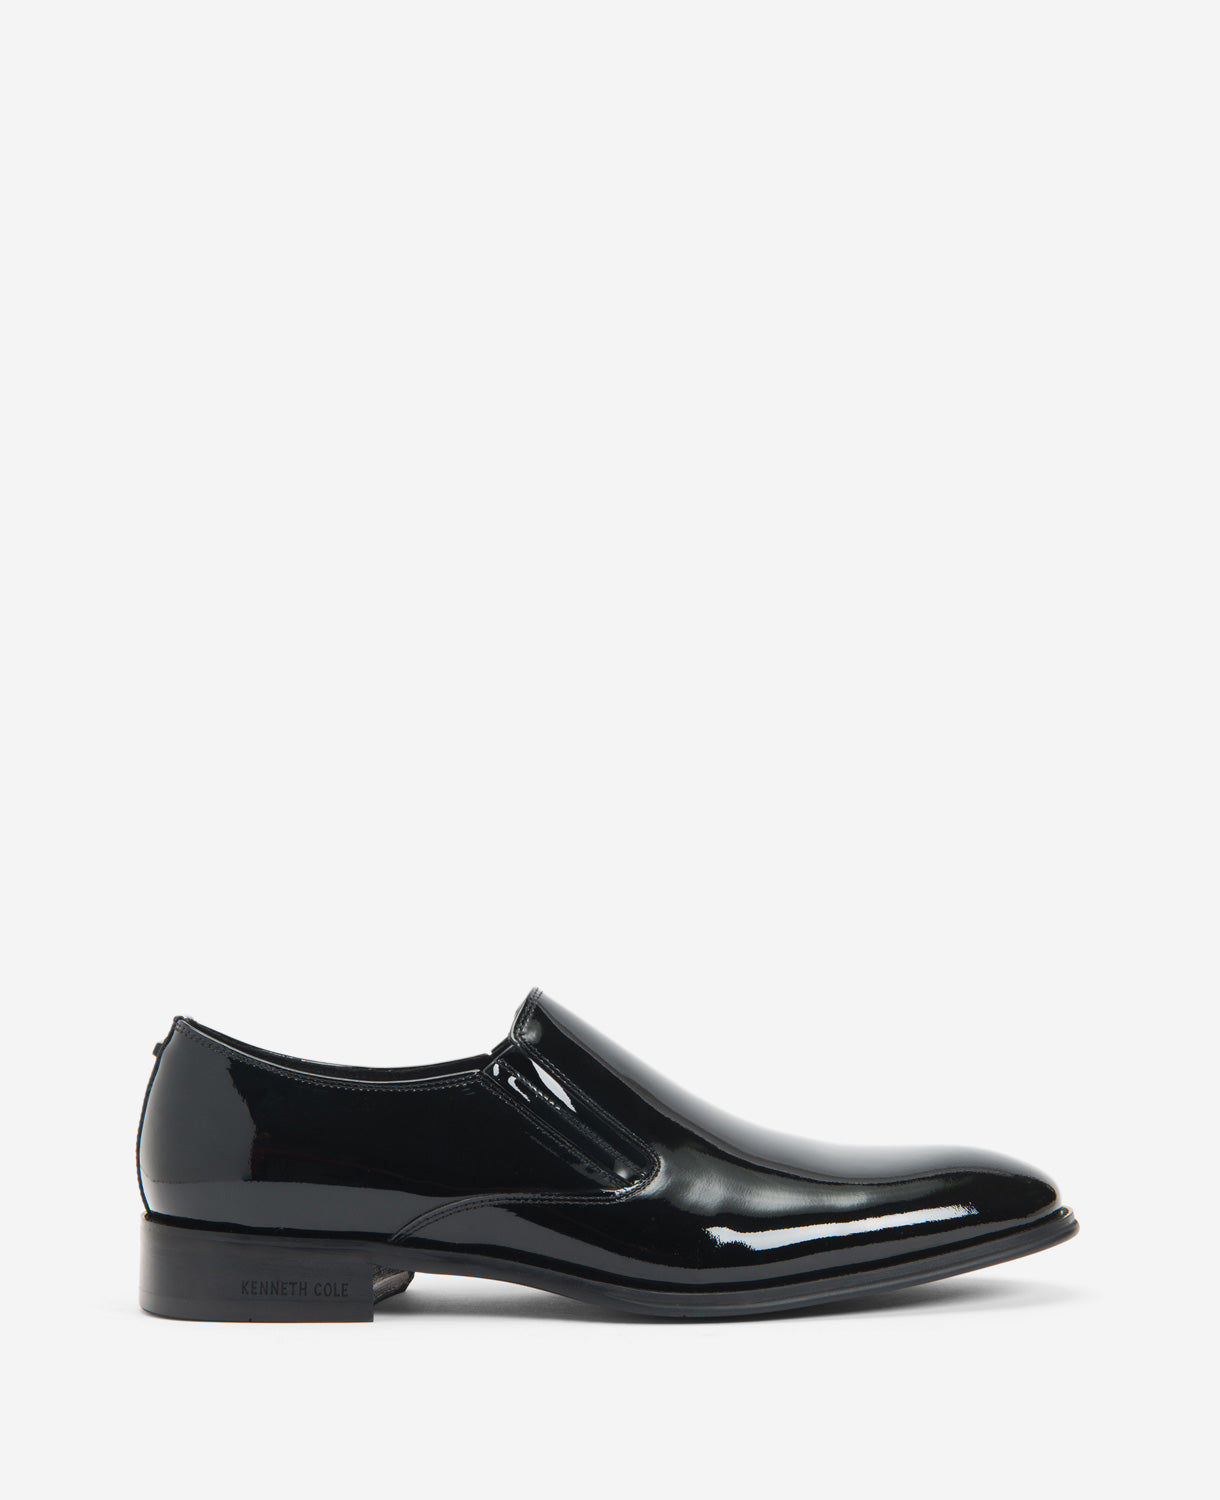 Kenneth Cole | Site Exclusive! Tully Patent Slip-On Oxford Shoe in Black, Size: 12